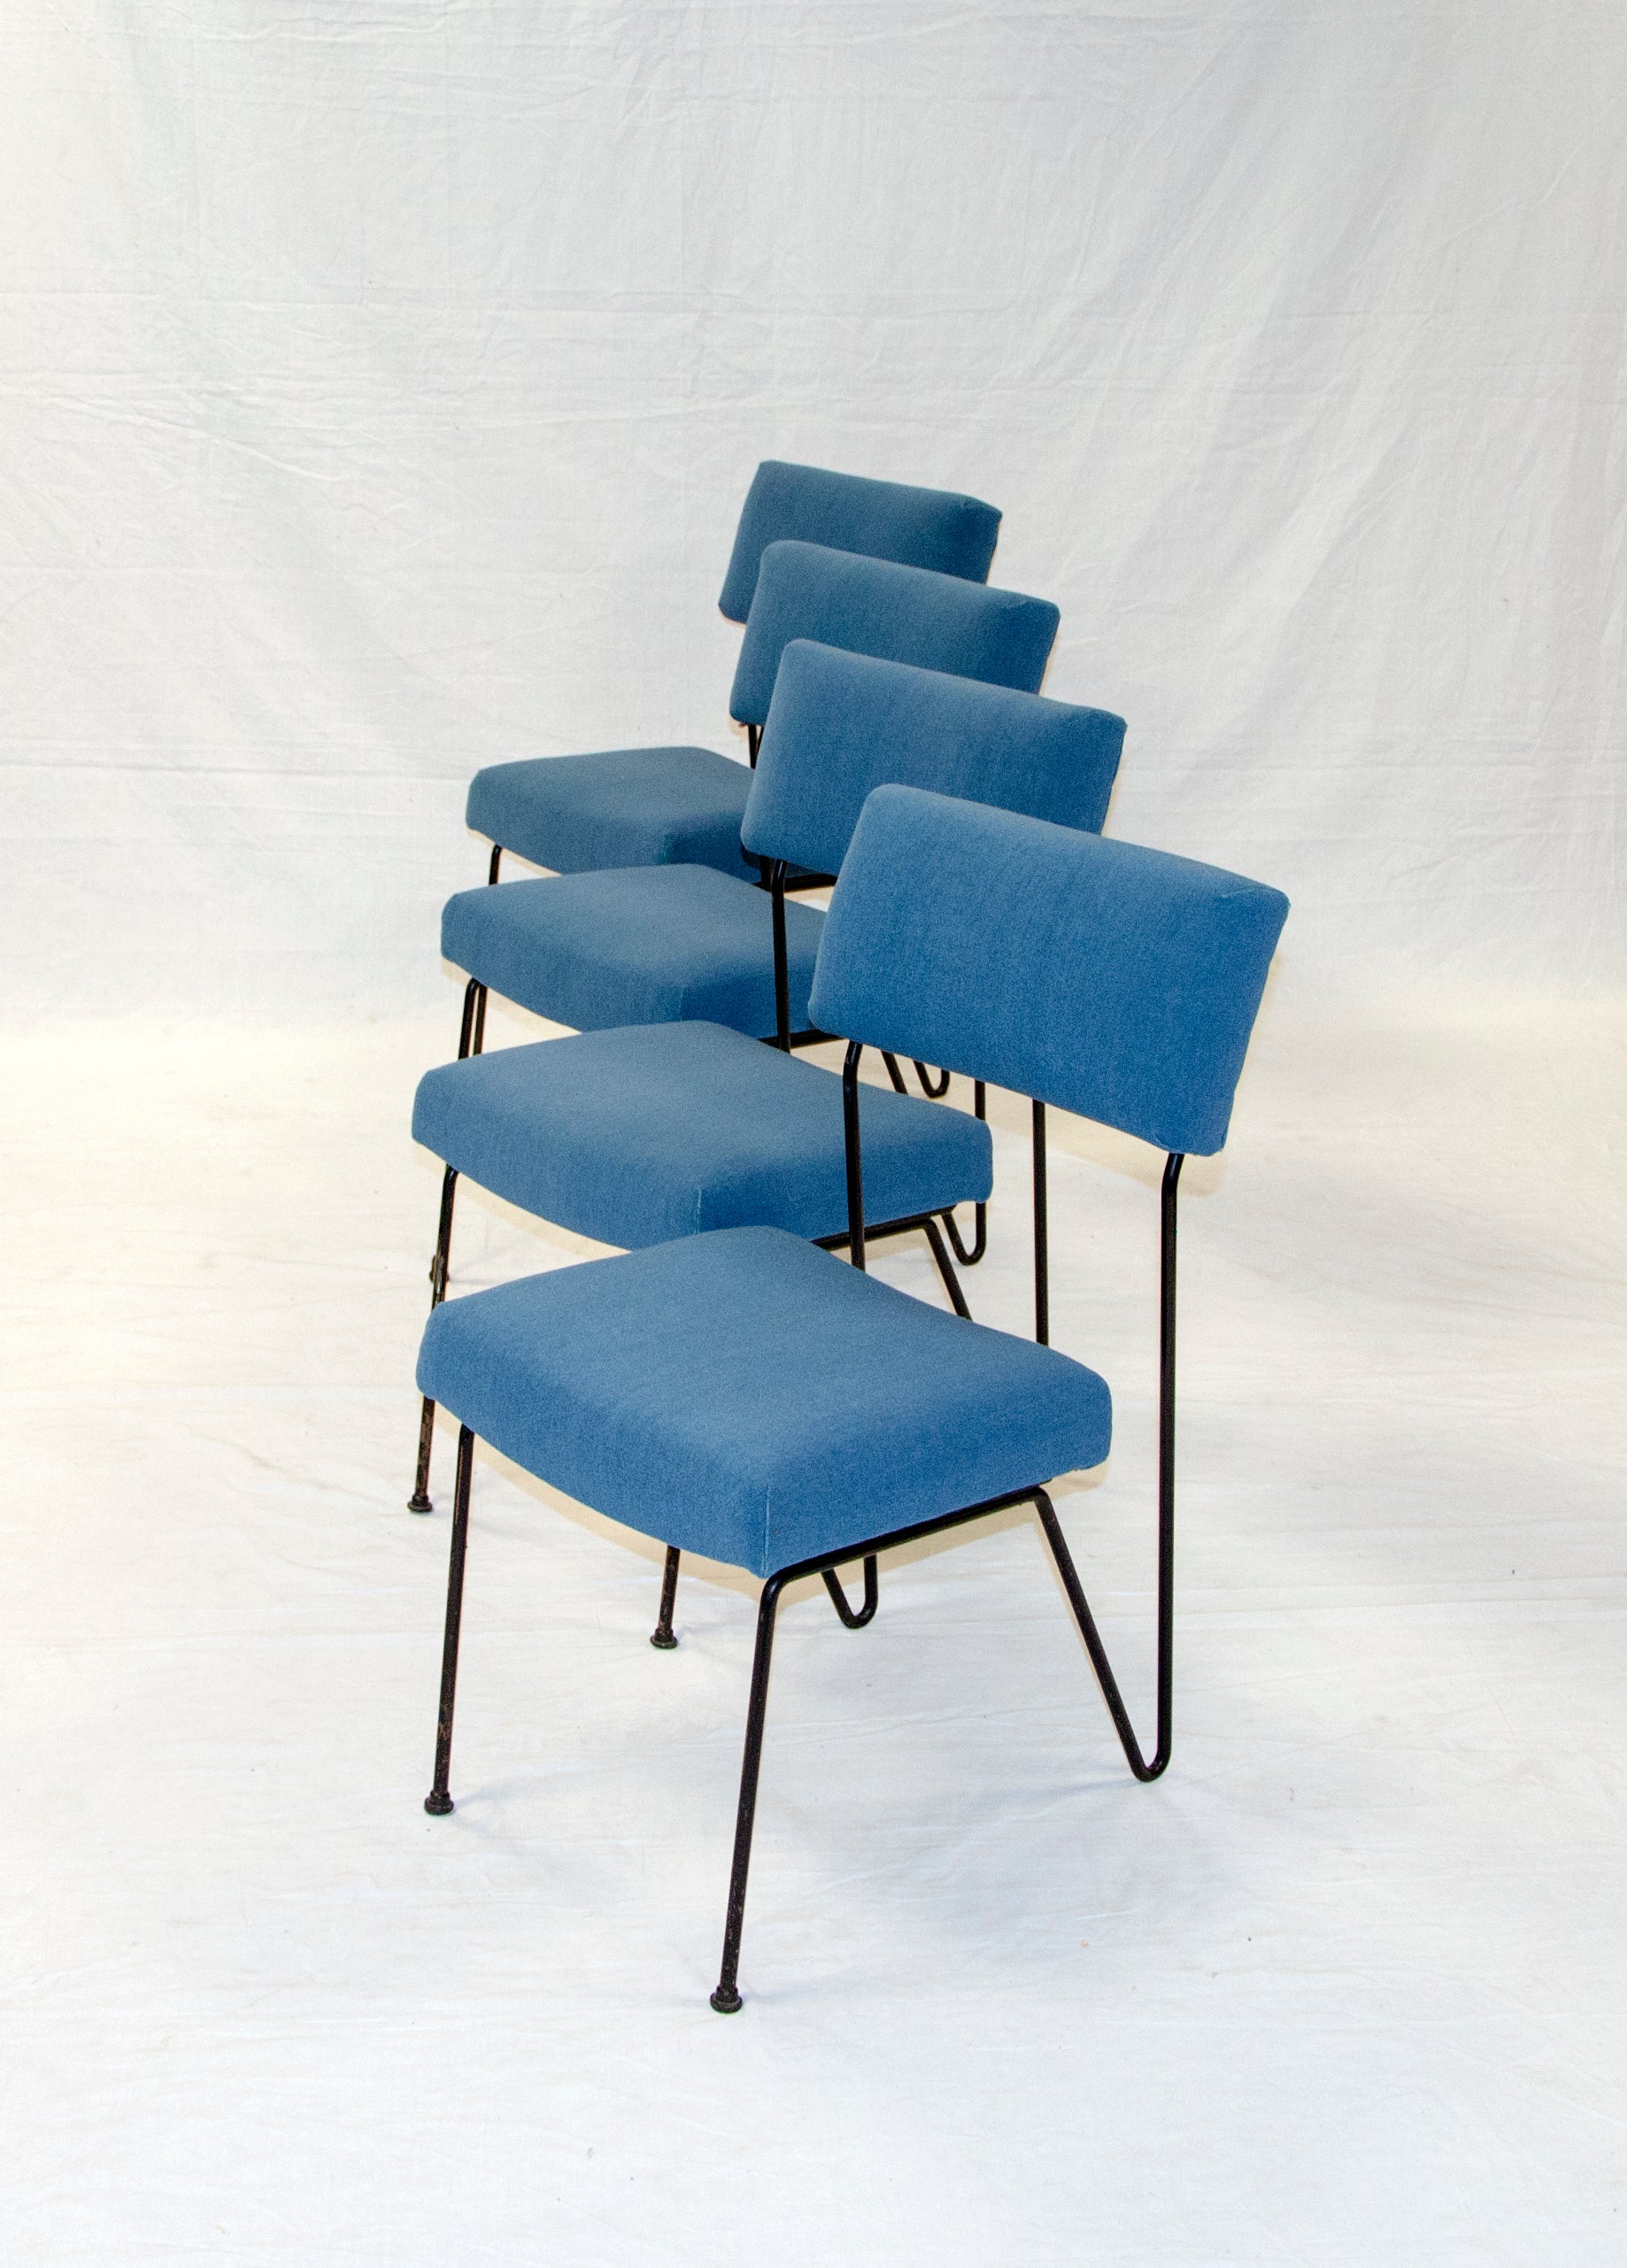 California Modernist Set of Four Chairs Dorothy Schindele